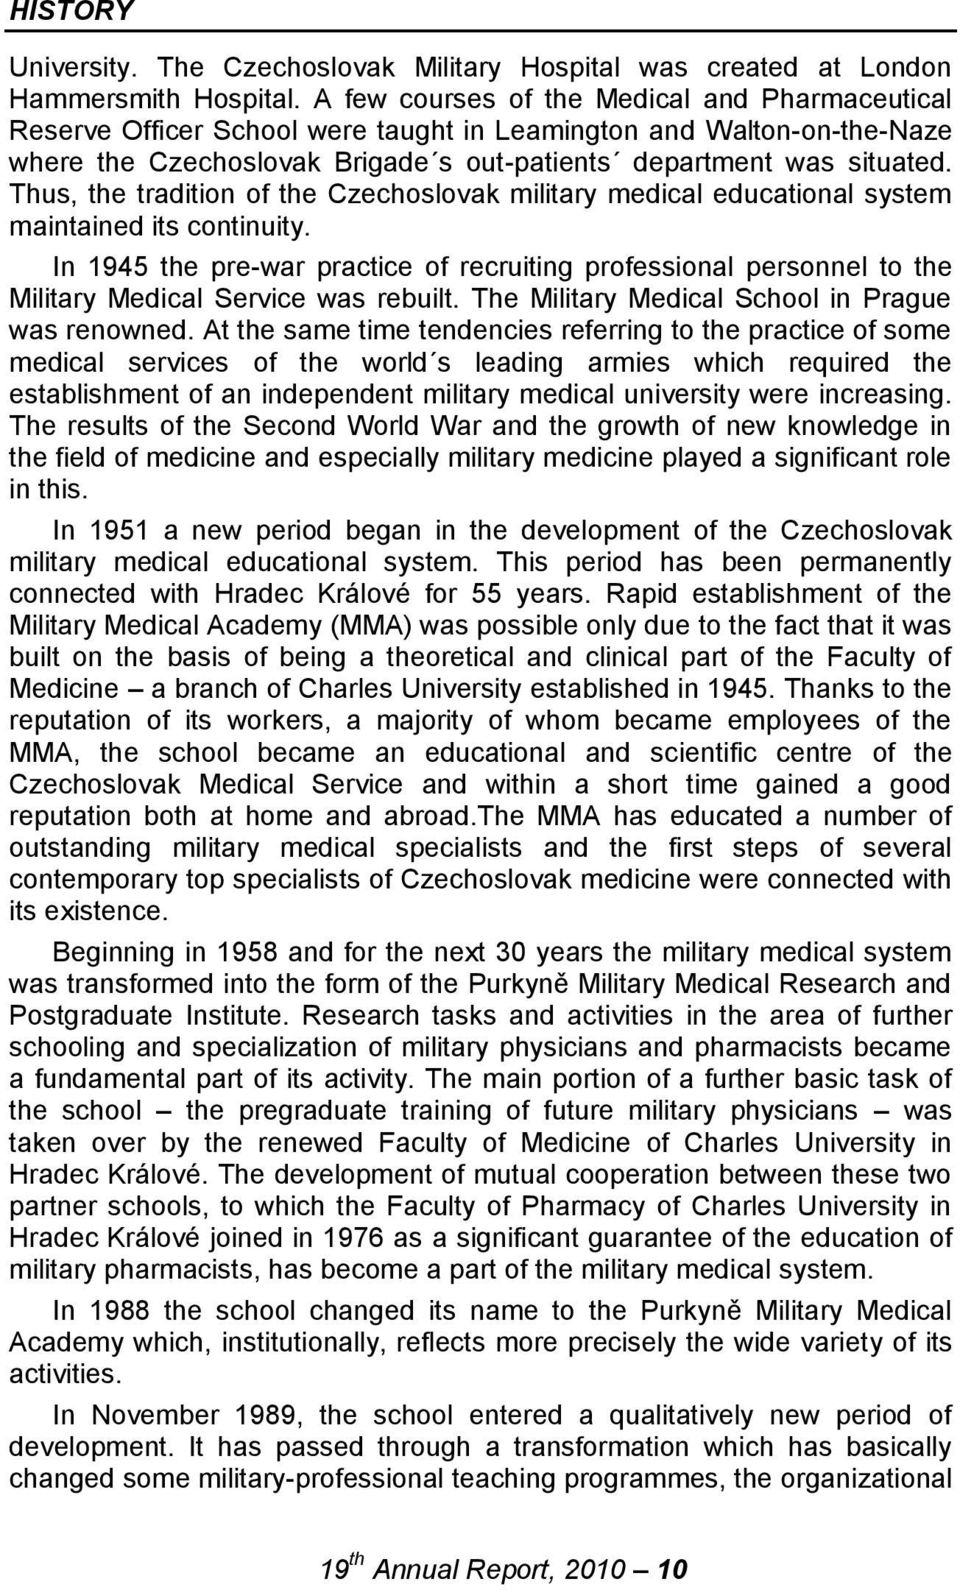 Thus, the tradition of the Czechoslovak military medical educational system maintained its continuity.